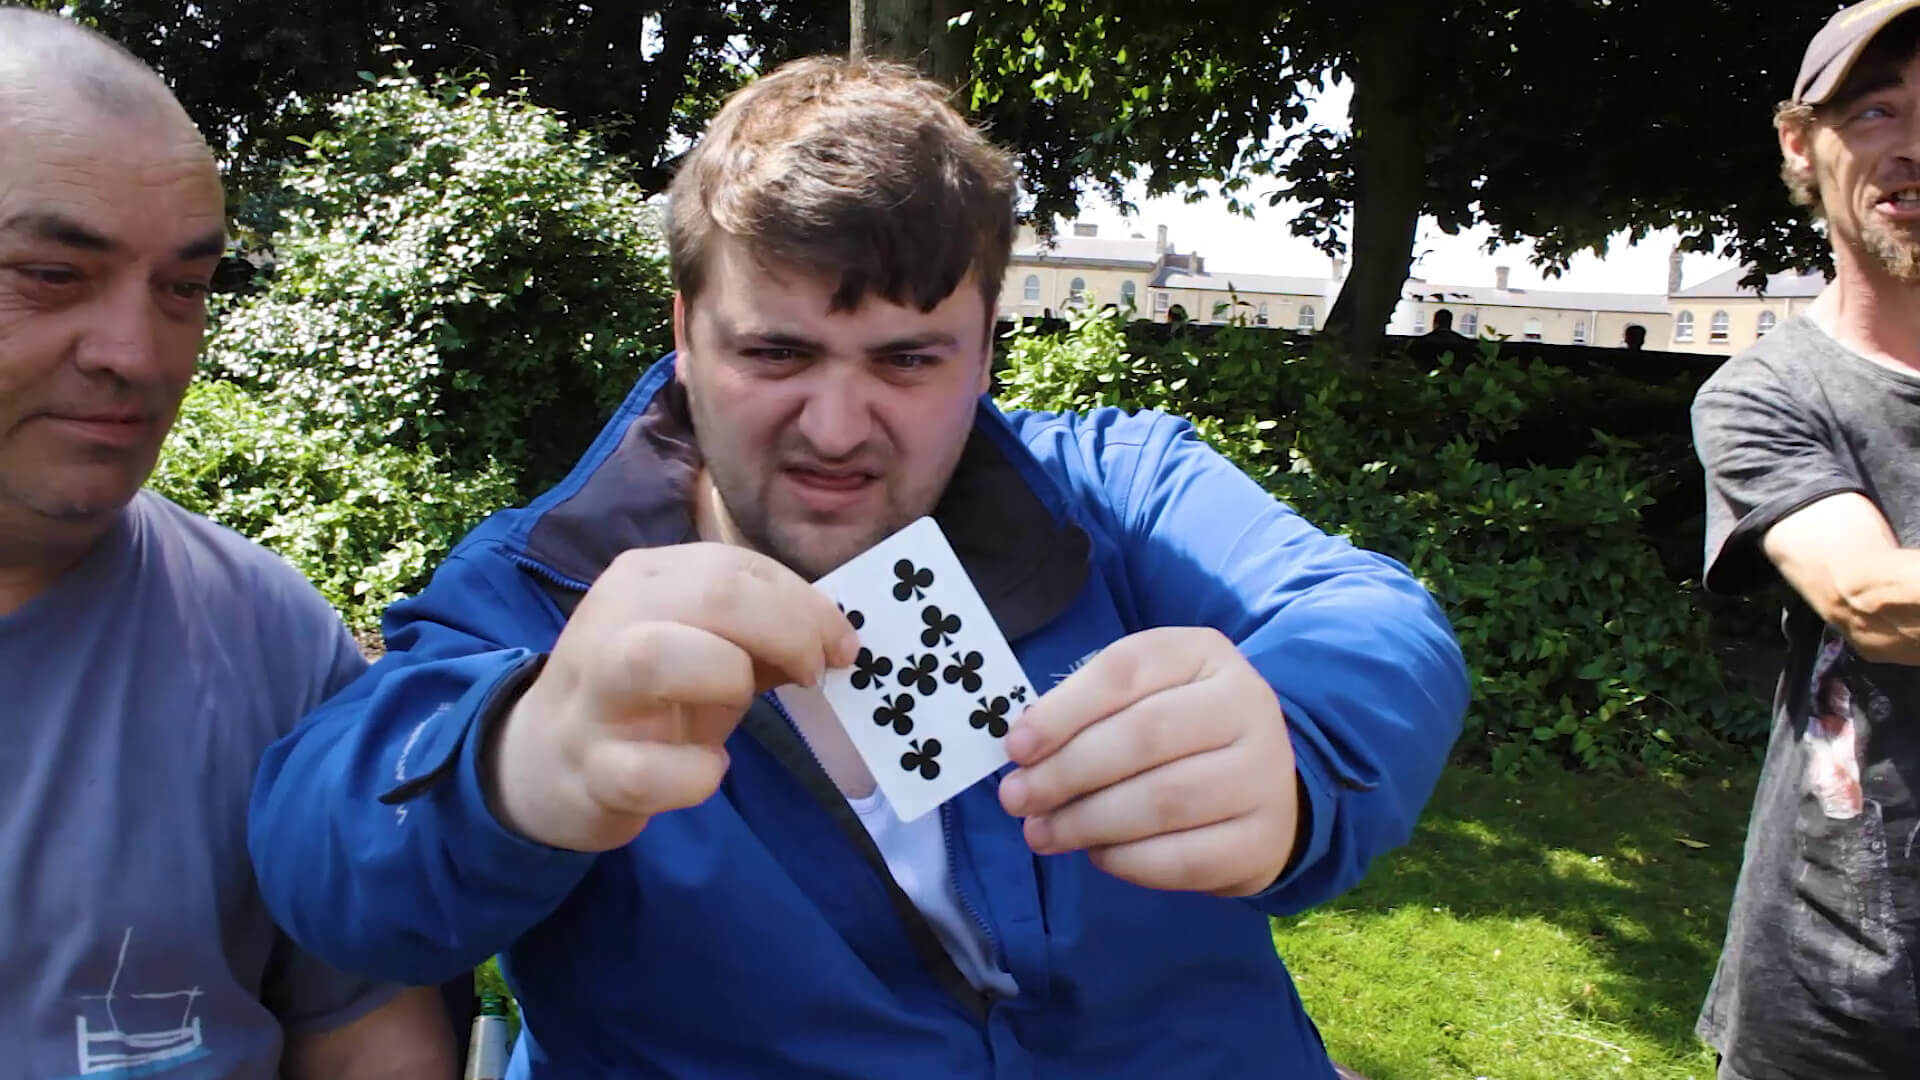 Man holding a playing card as part of card trick